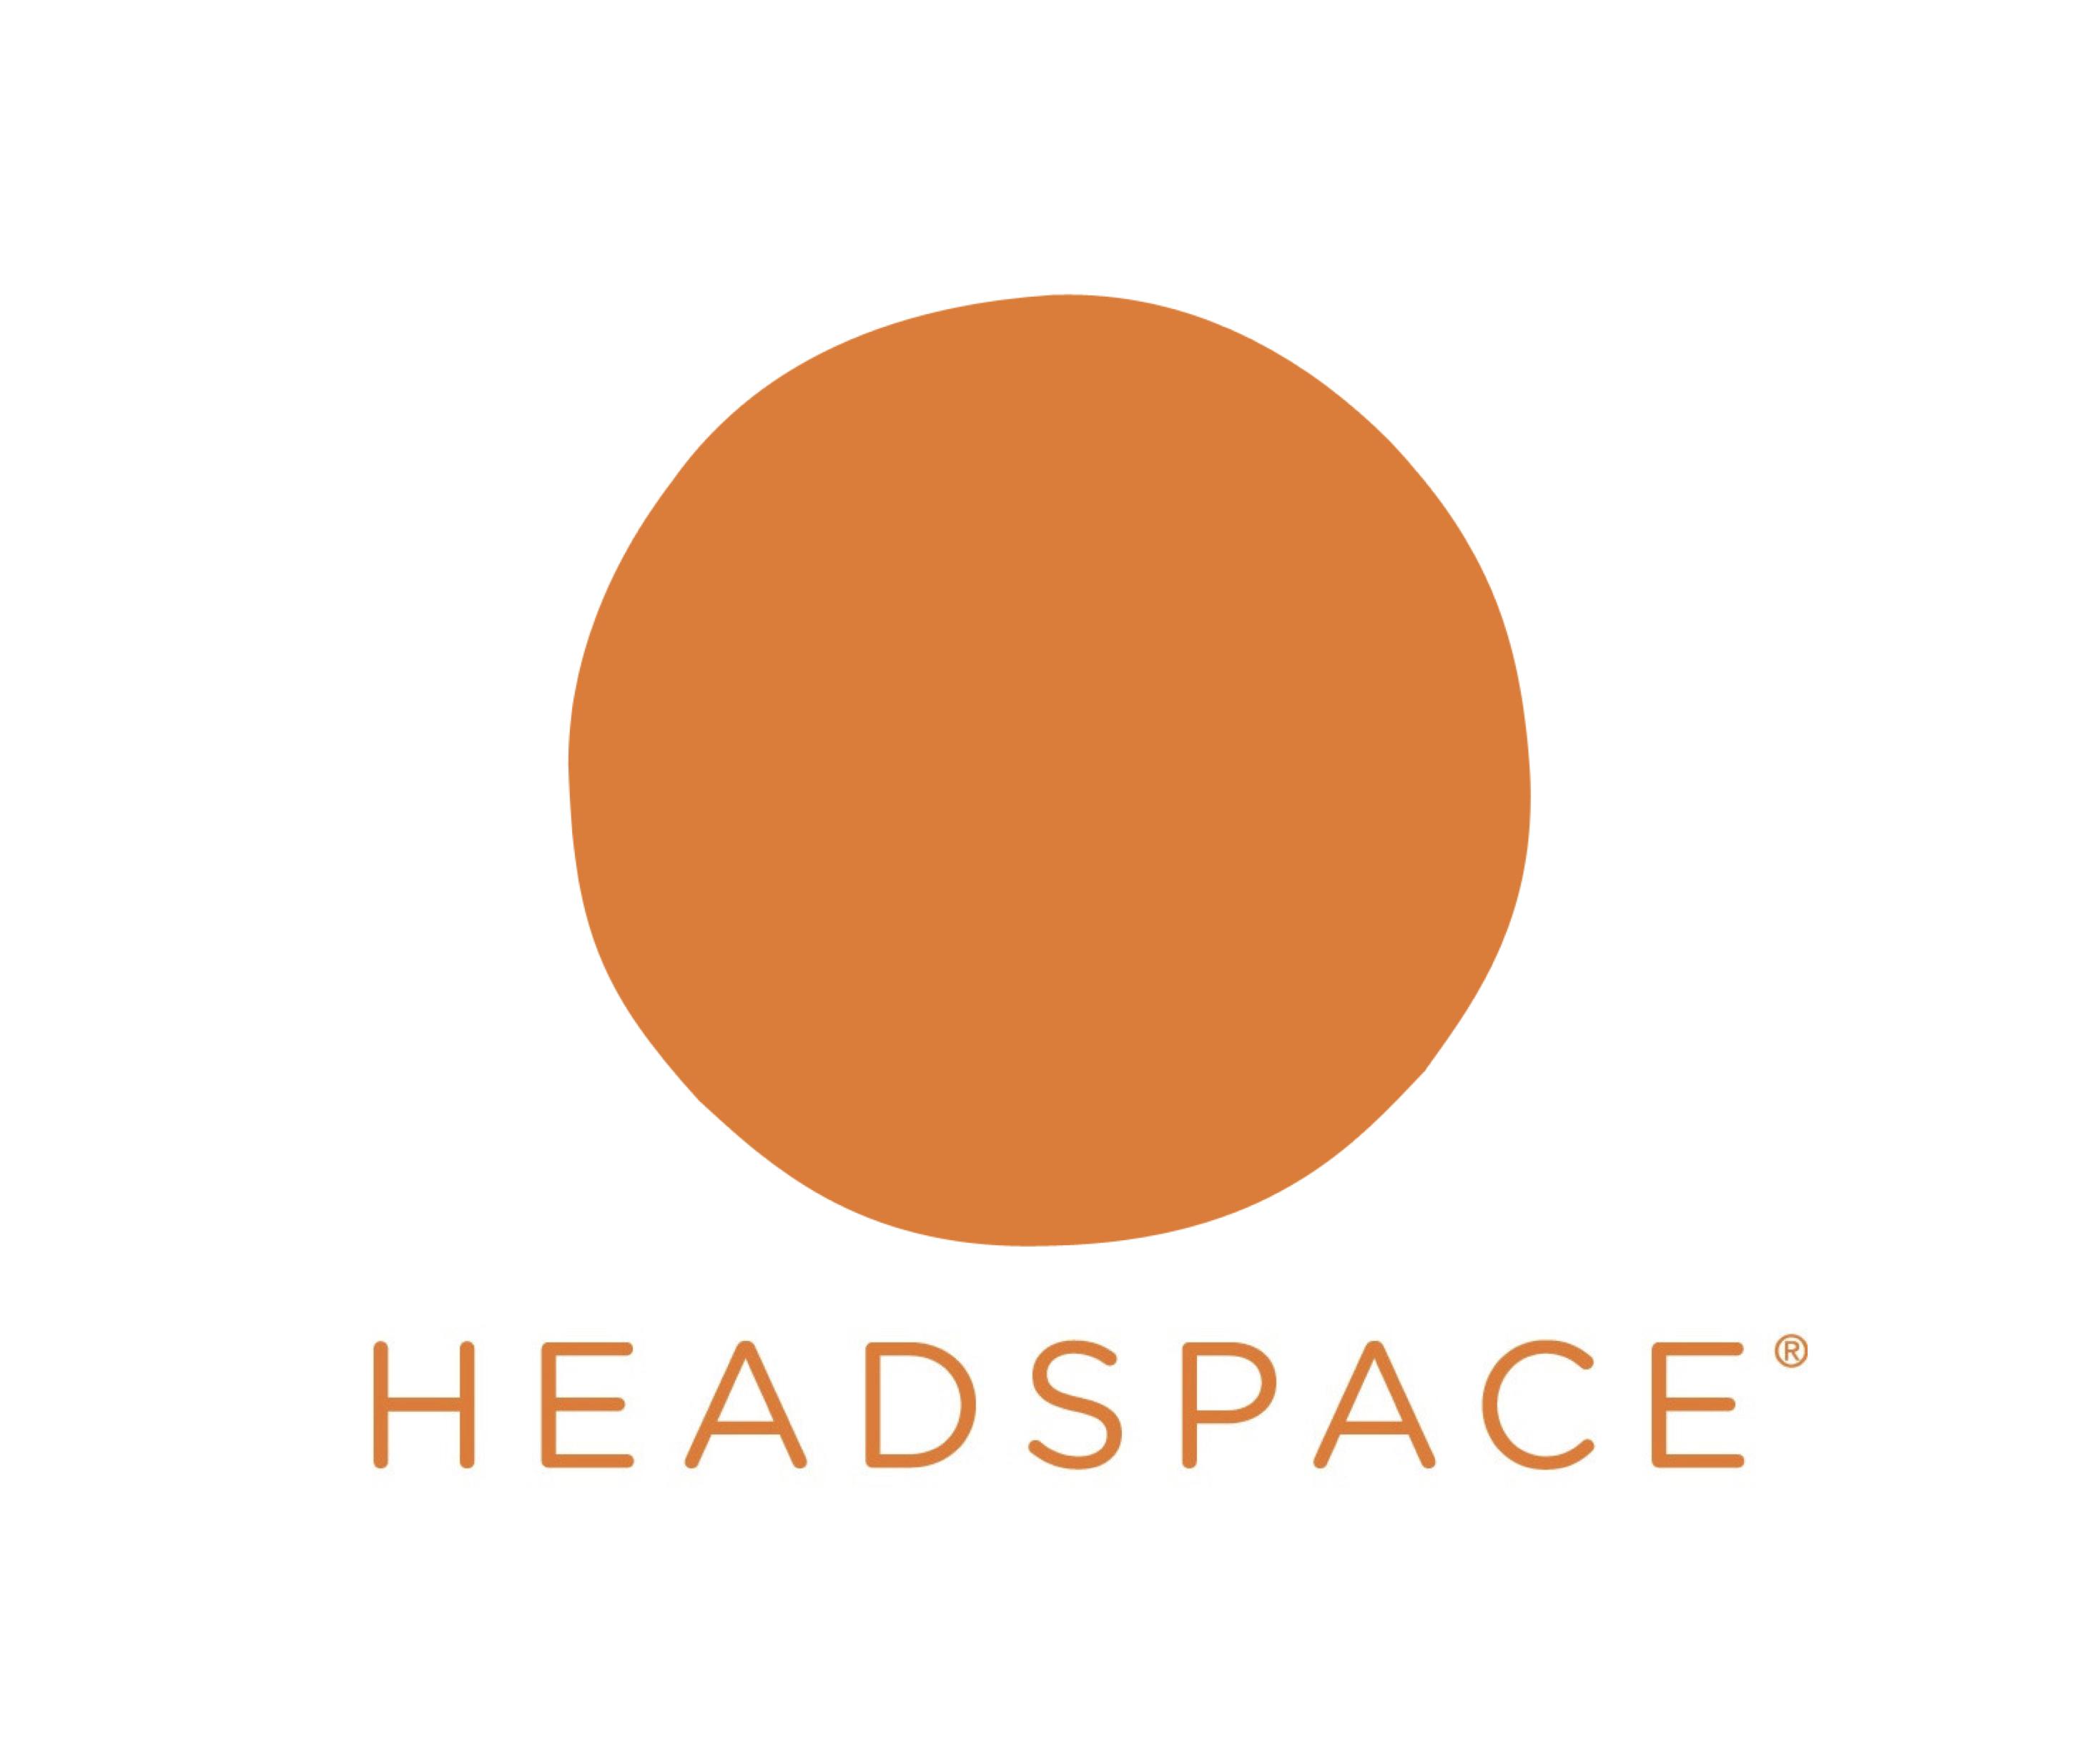 Clear App Logo - Use the Headspace app to clear your mind Tampa Bay 100